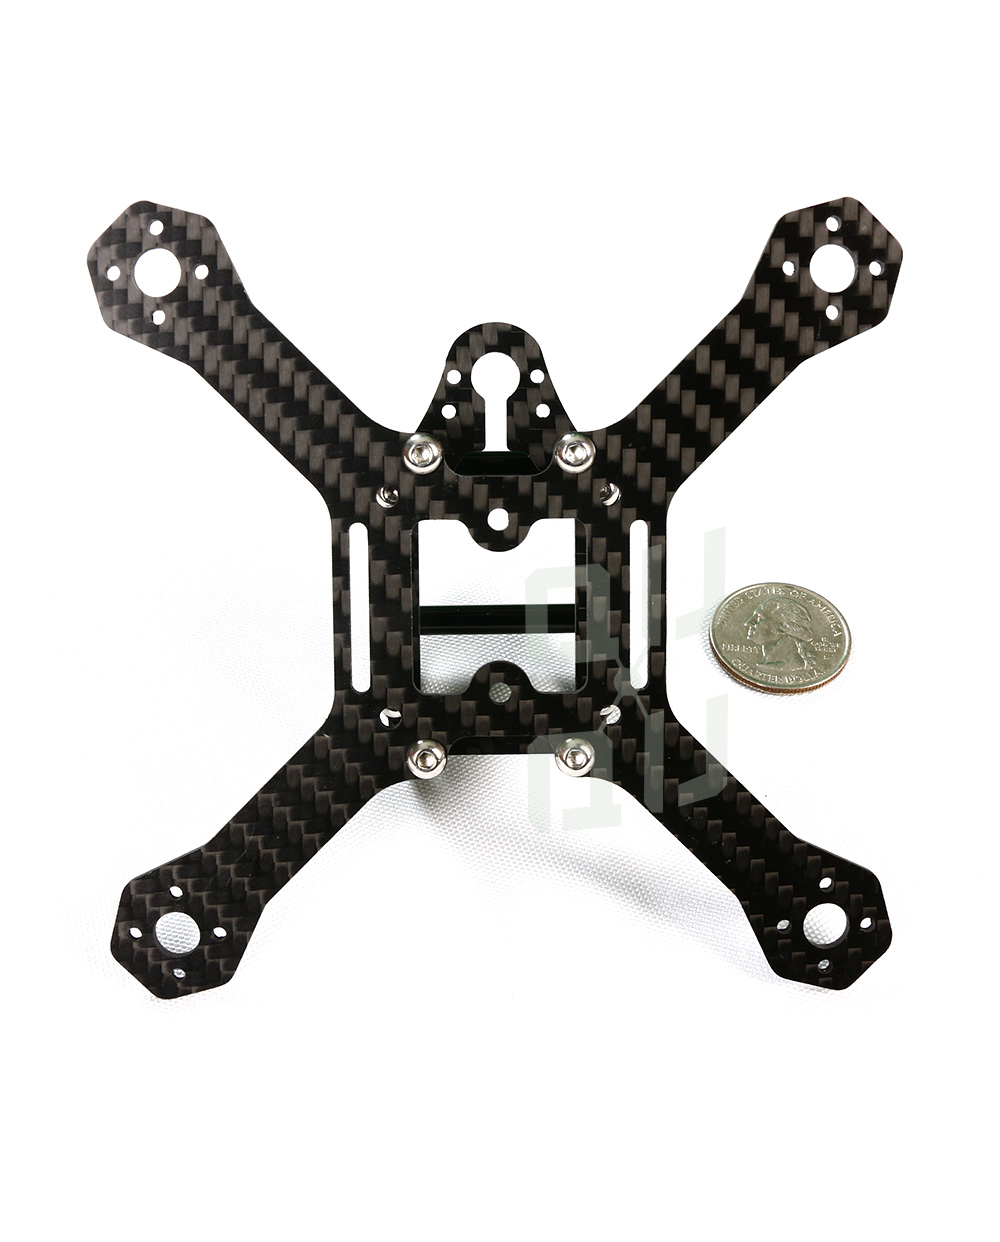 qq130 fully built 3" Racing Drone frame by QuadQuestions bottom view